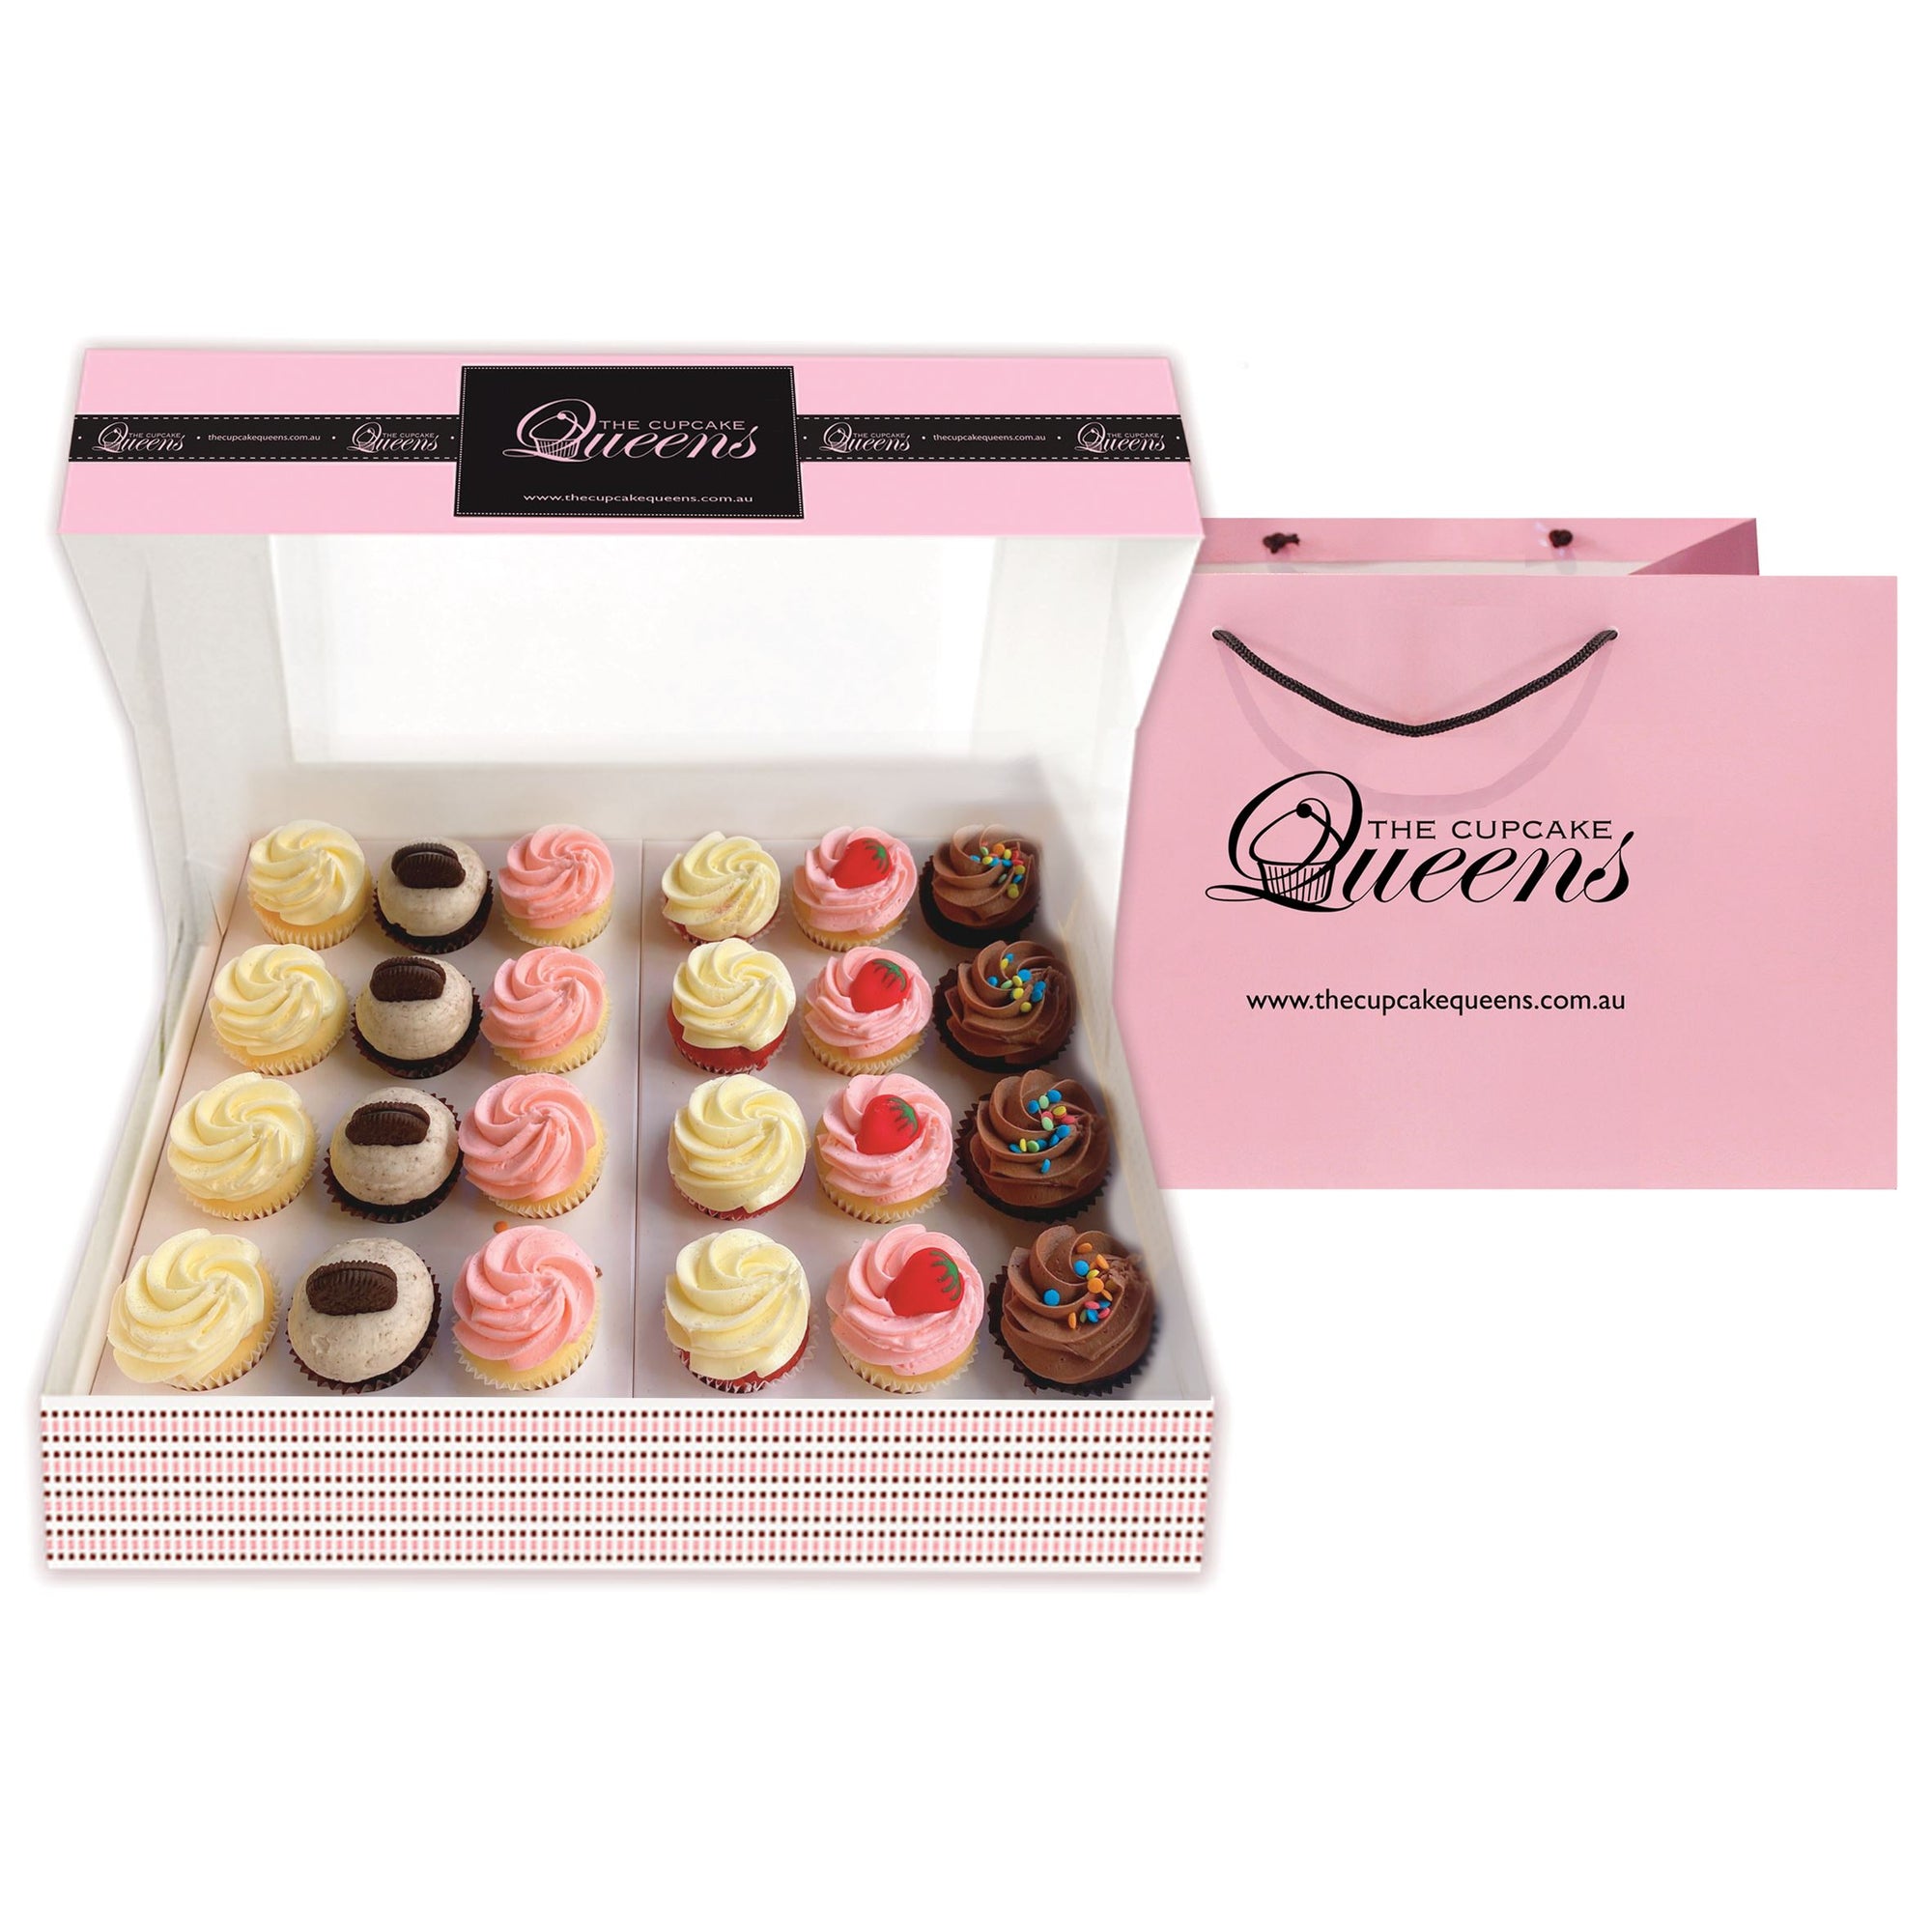 Mini Daily Favourites 24 Pack Cupcakes Online Boxes The Cupcake Queens 